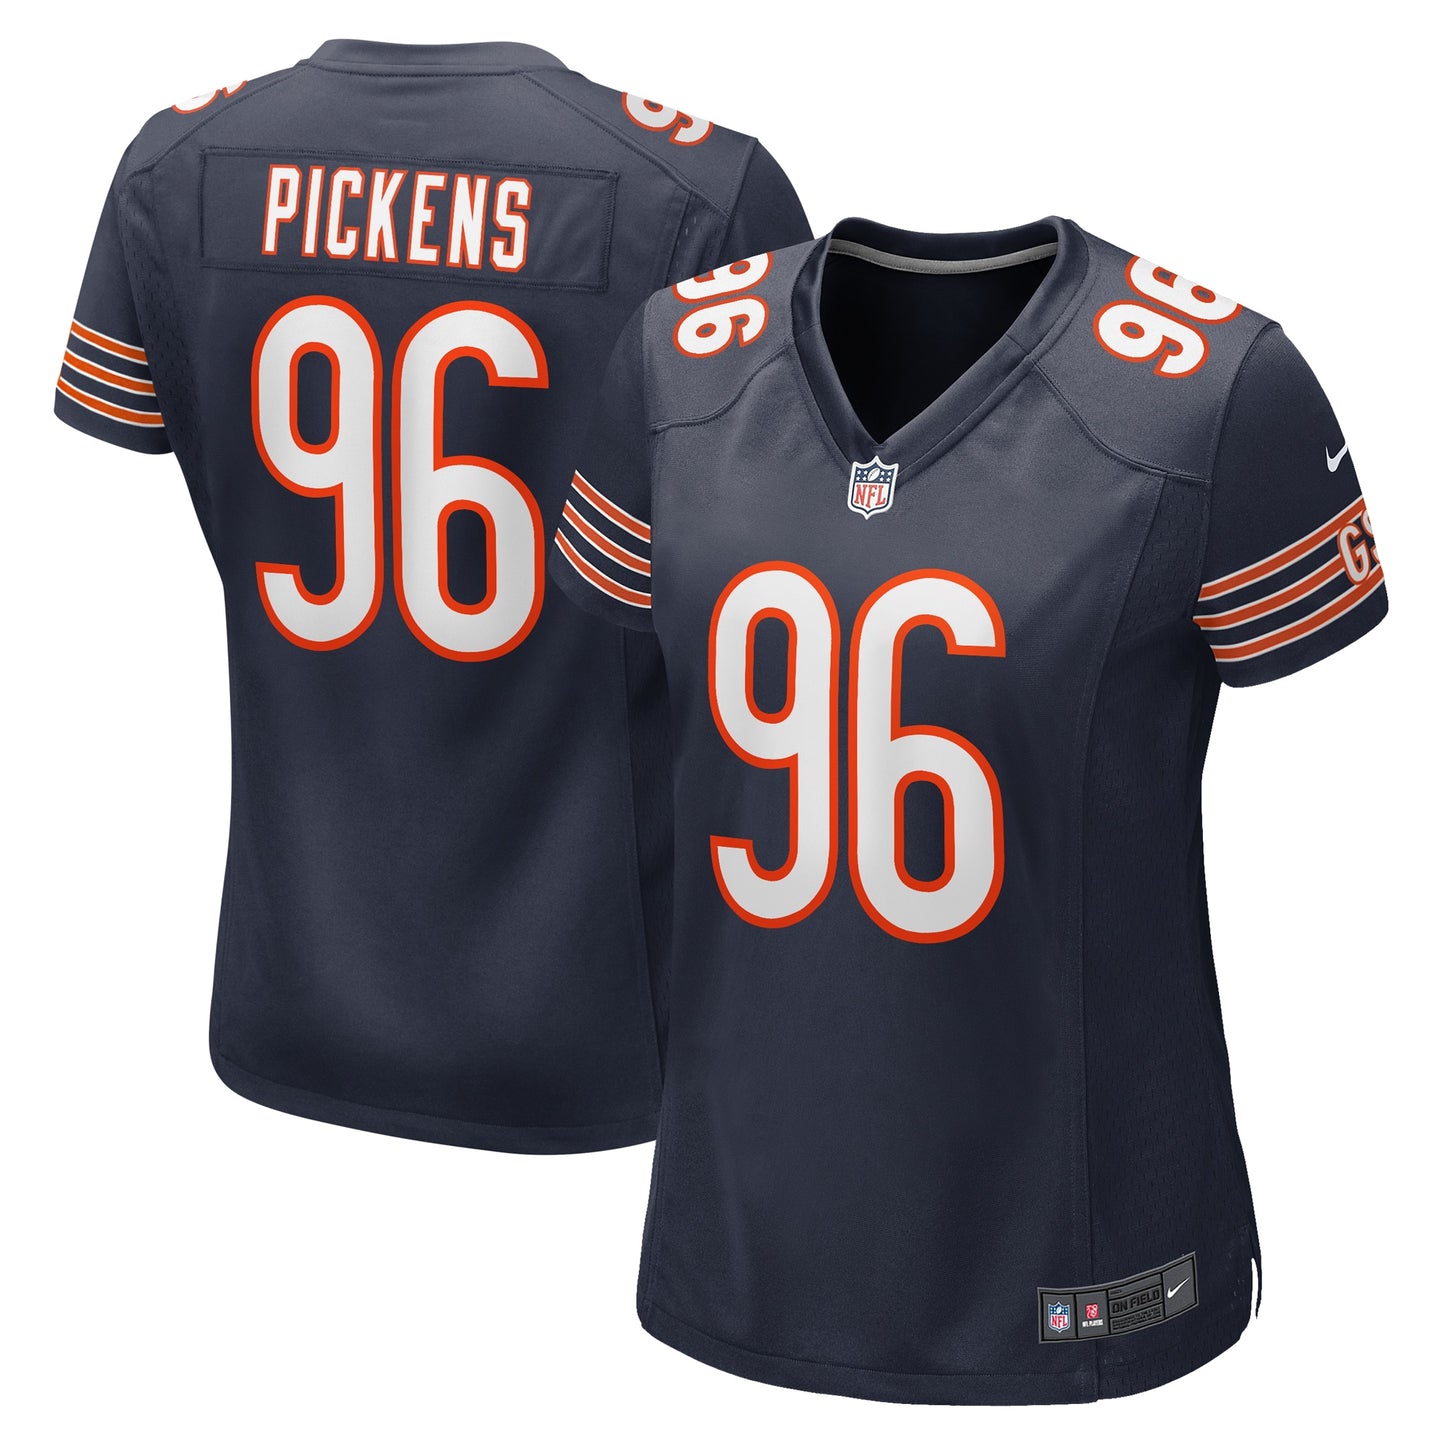 Zacch Pickens Chicago Bears Nike Women's Team Game Jersey - Navy